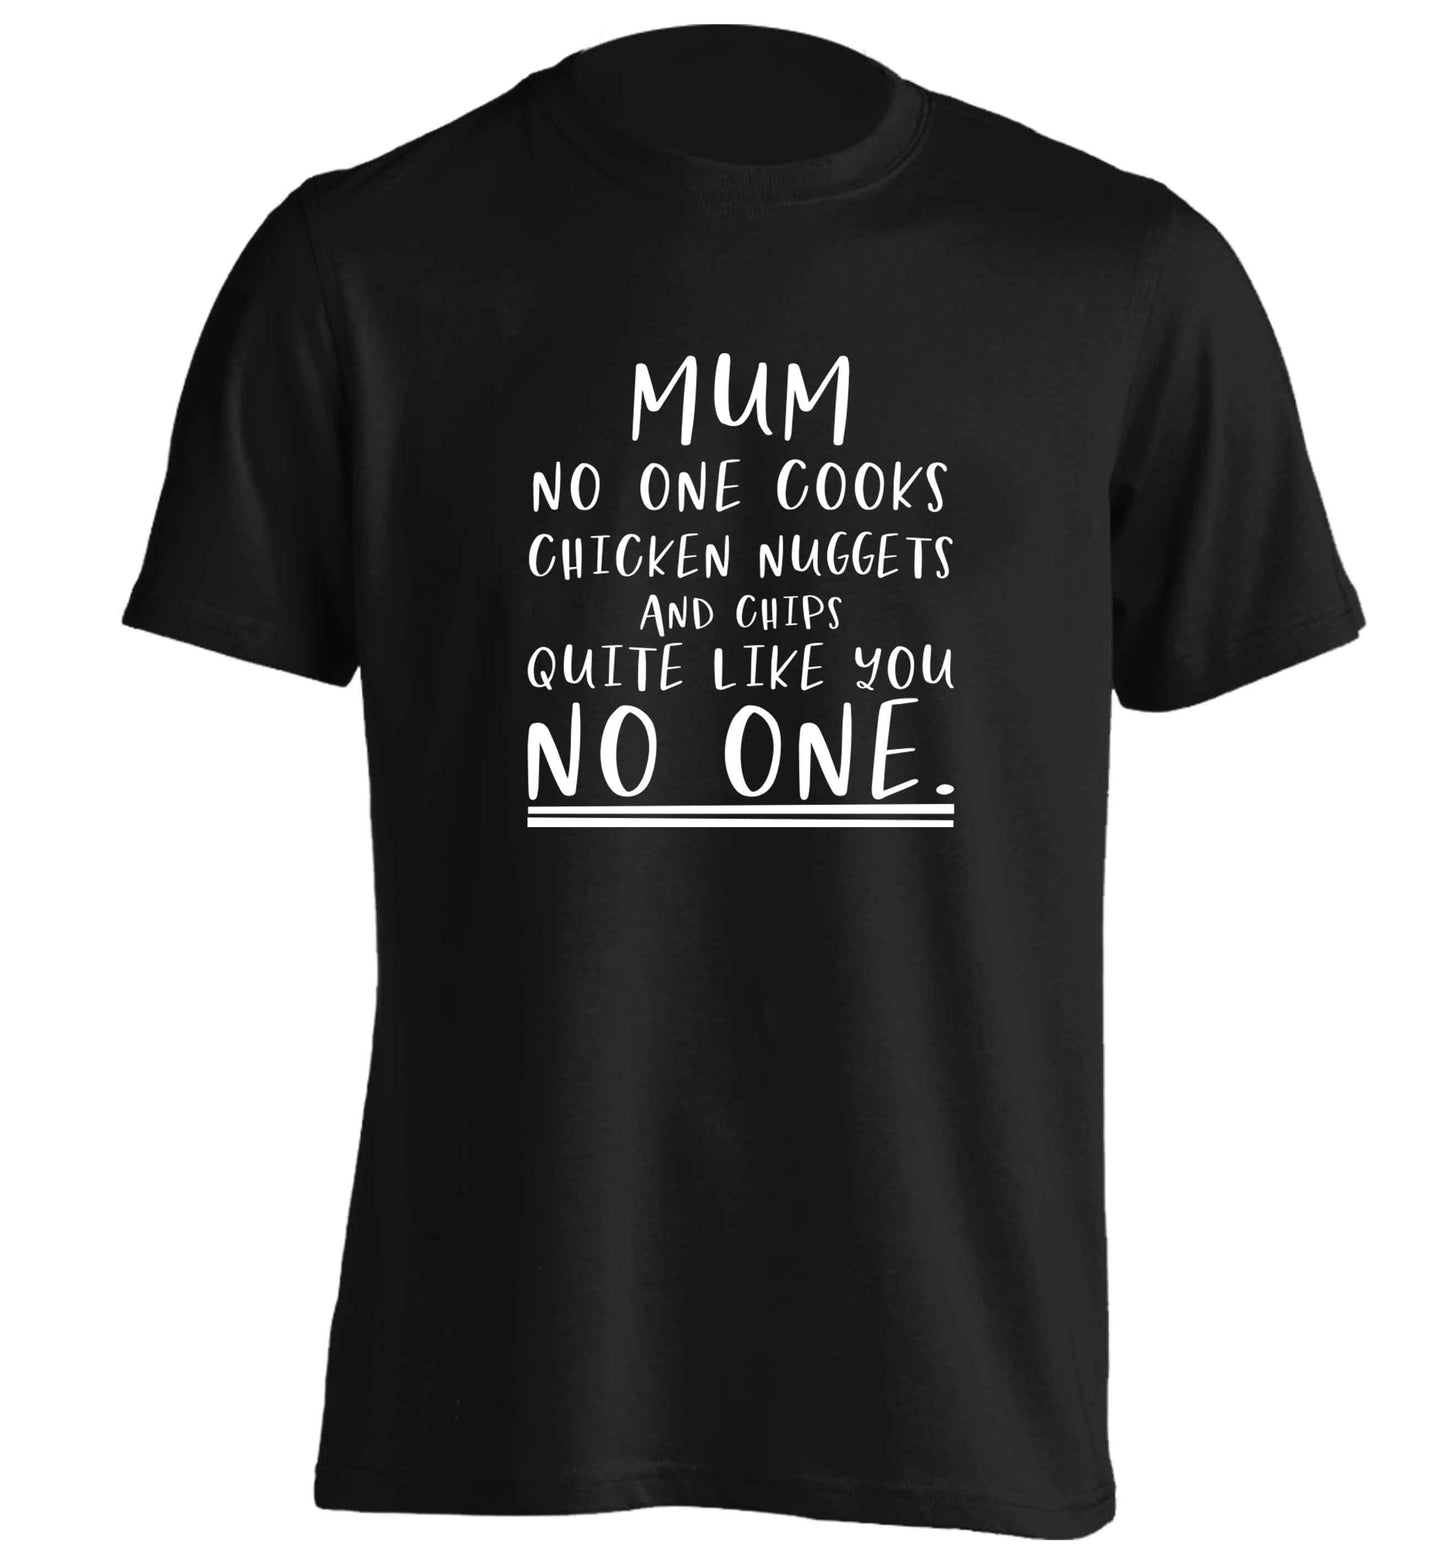 Super funny sassy gift for mother's day or birthday!  Mum no one cooks chicken nuggets and chips like you no one adults unisex black Tshirt 2XL